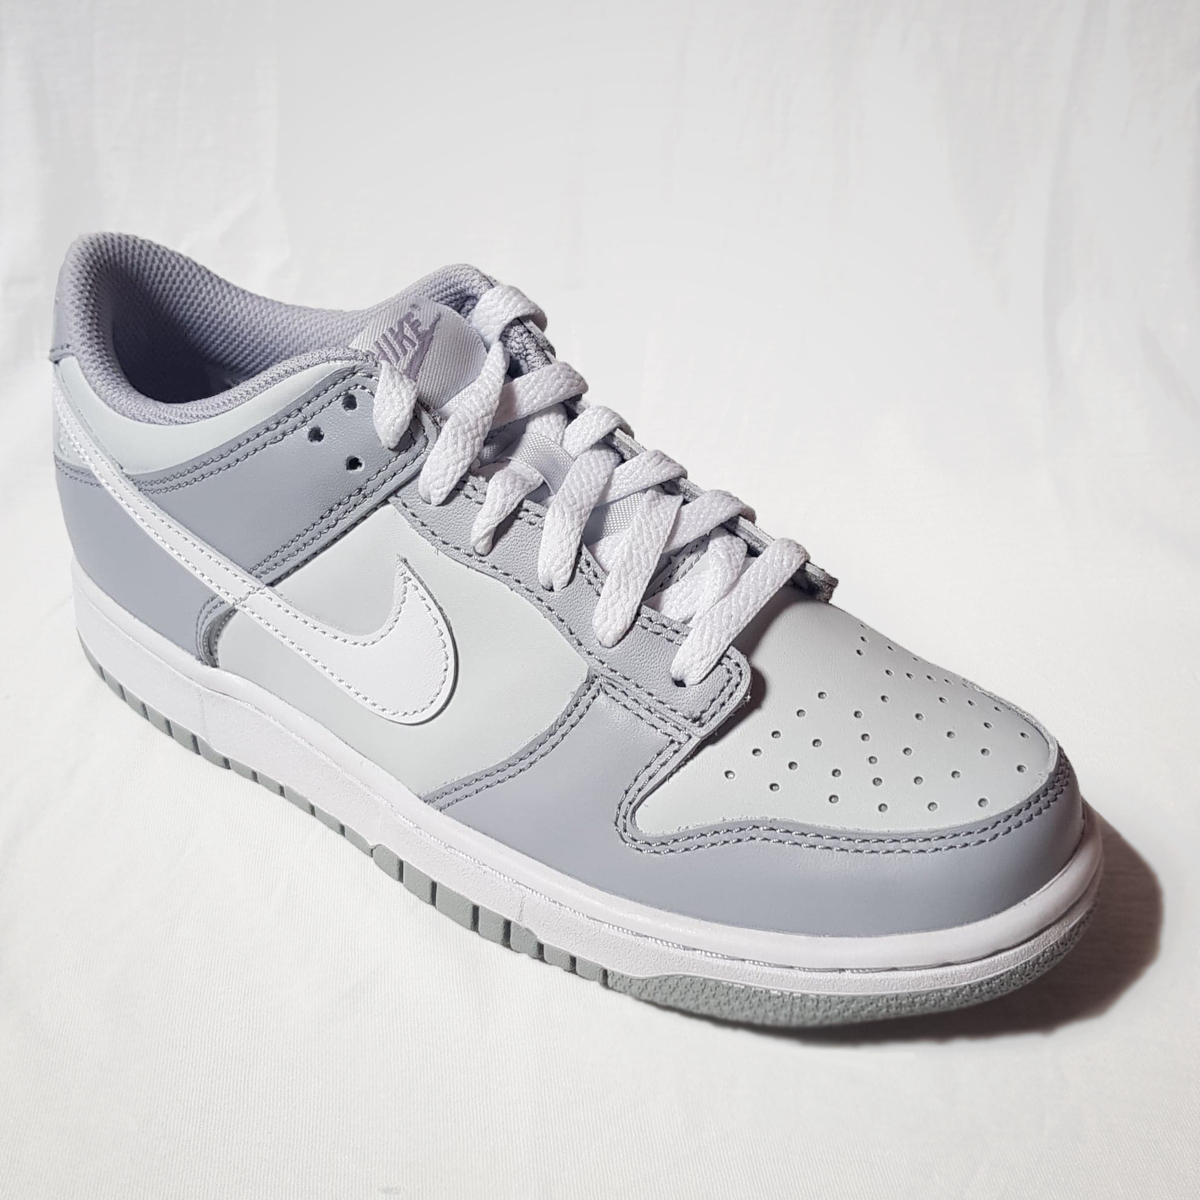 Nike Gris Nike Dunk Low Two Toned Grey (GS) - DH9765-001 - Taille : 39 iO0yohWt